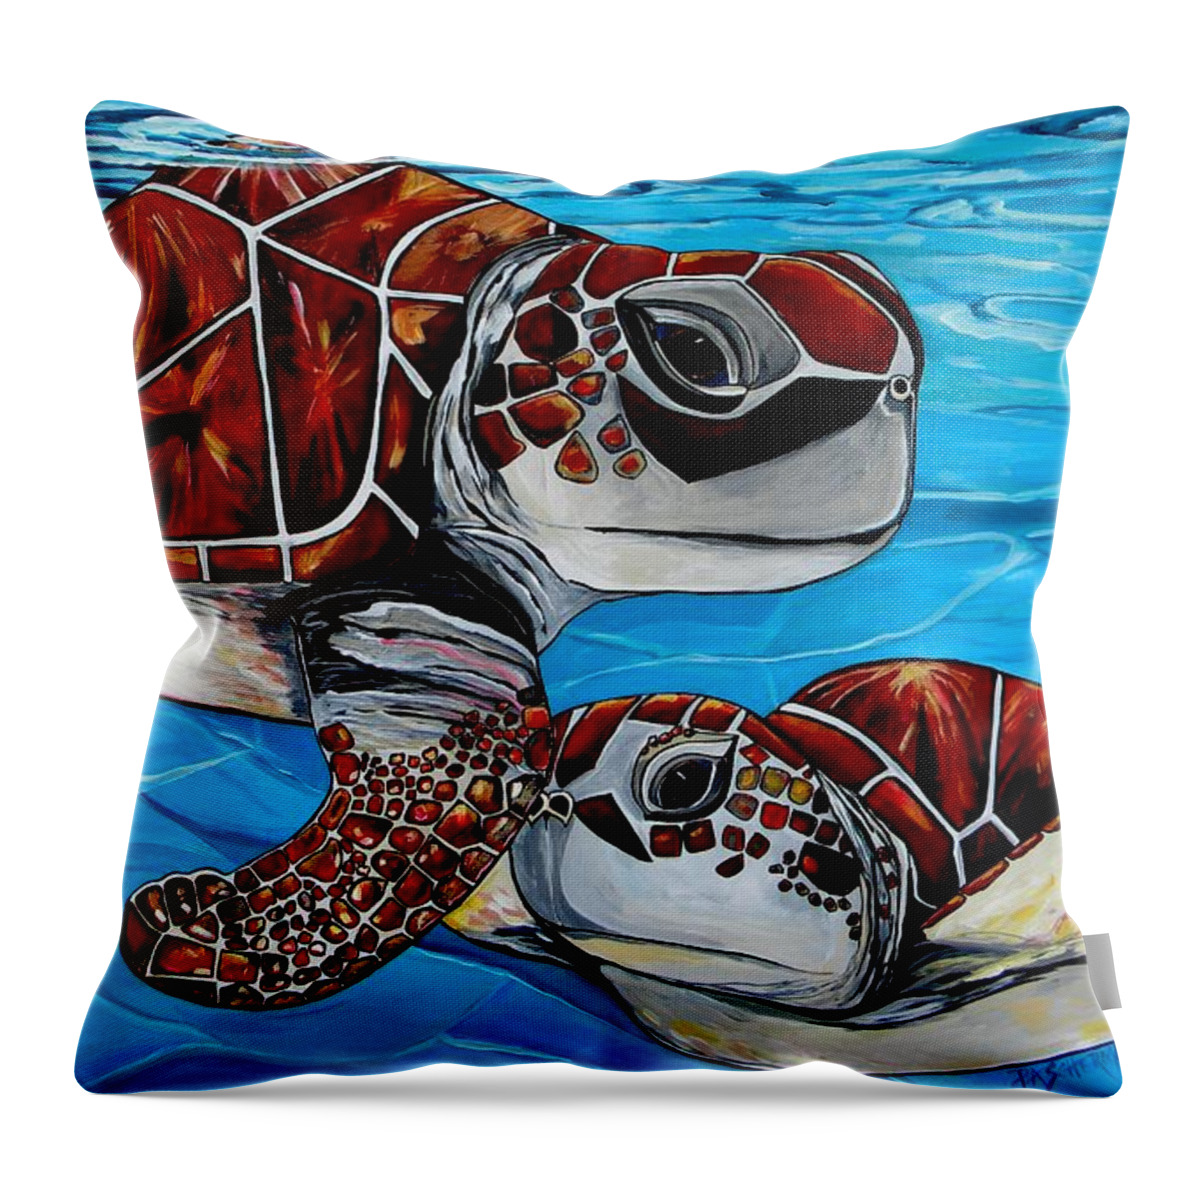 Turtles Throw Pillow featuring the painting Peace Love And Turtles by Patti Schermerhorn